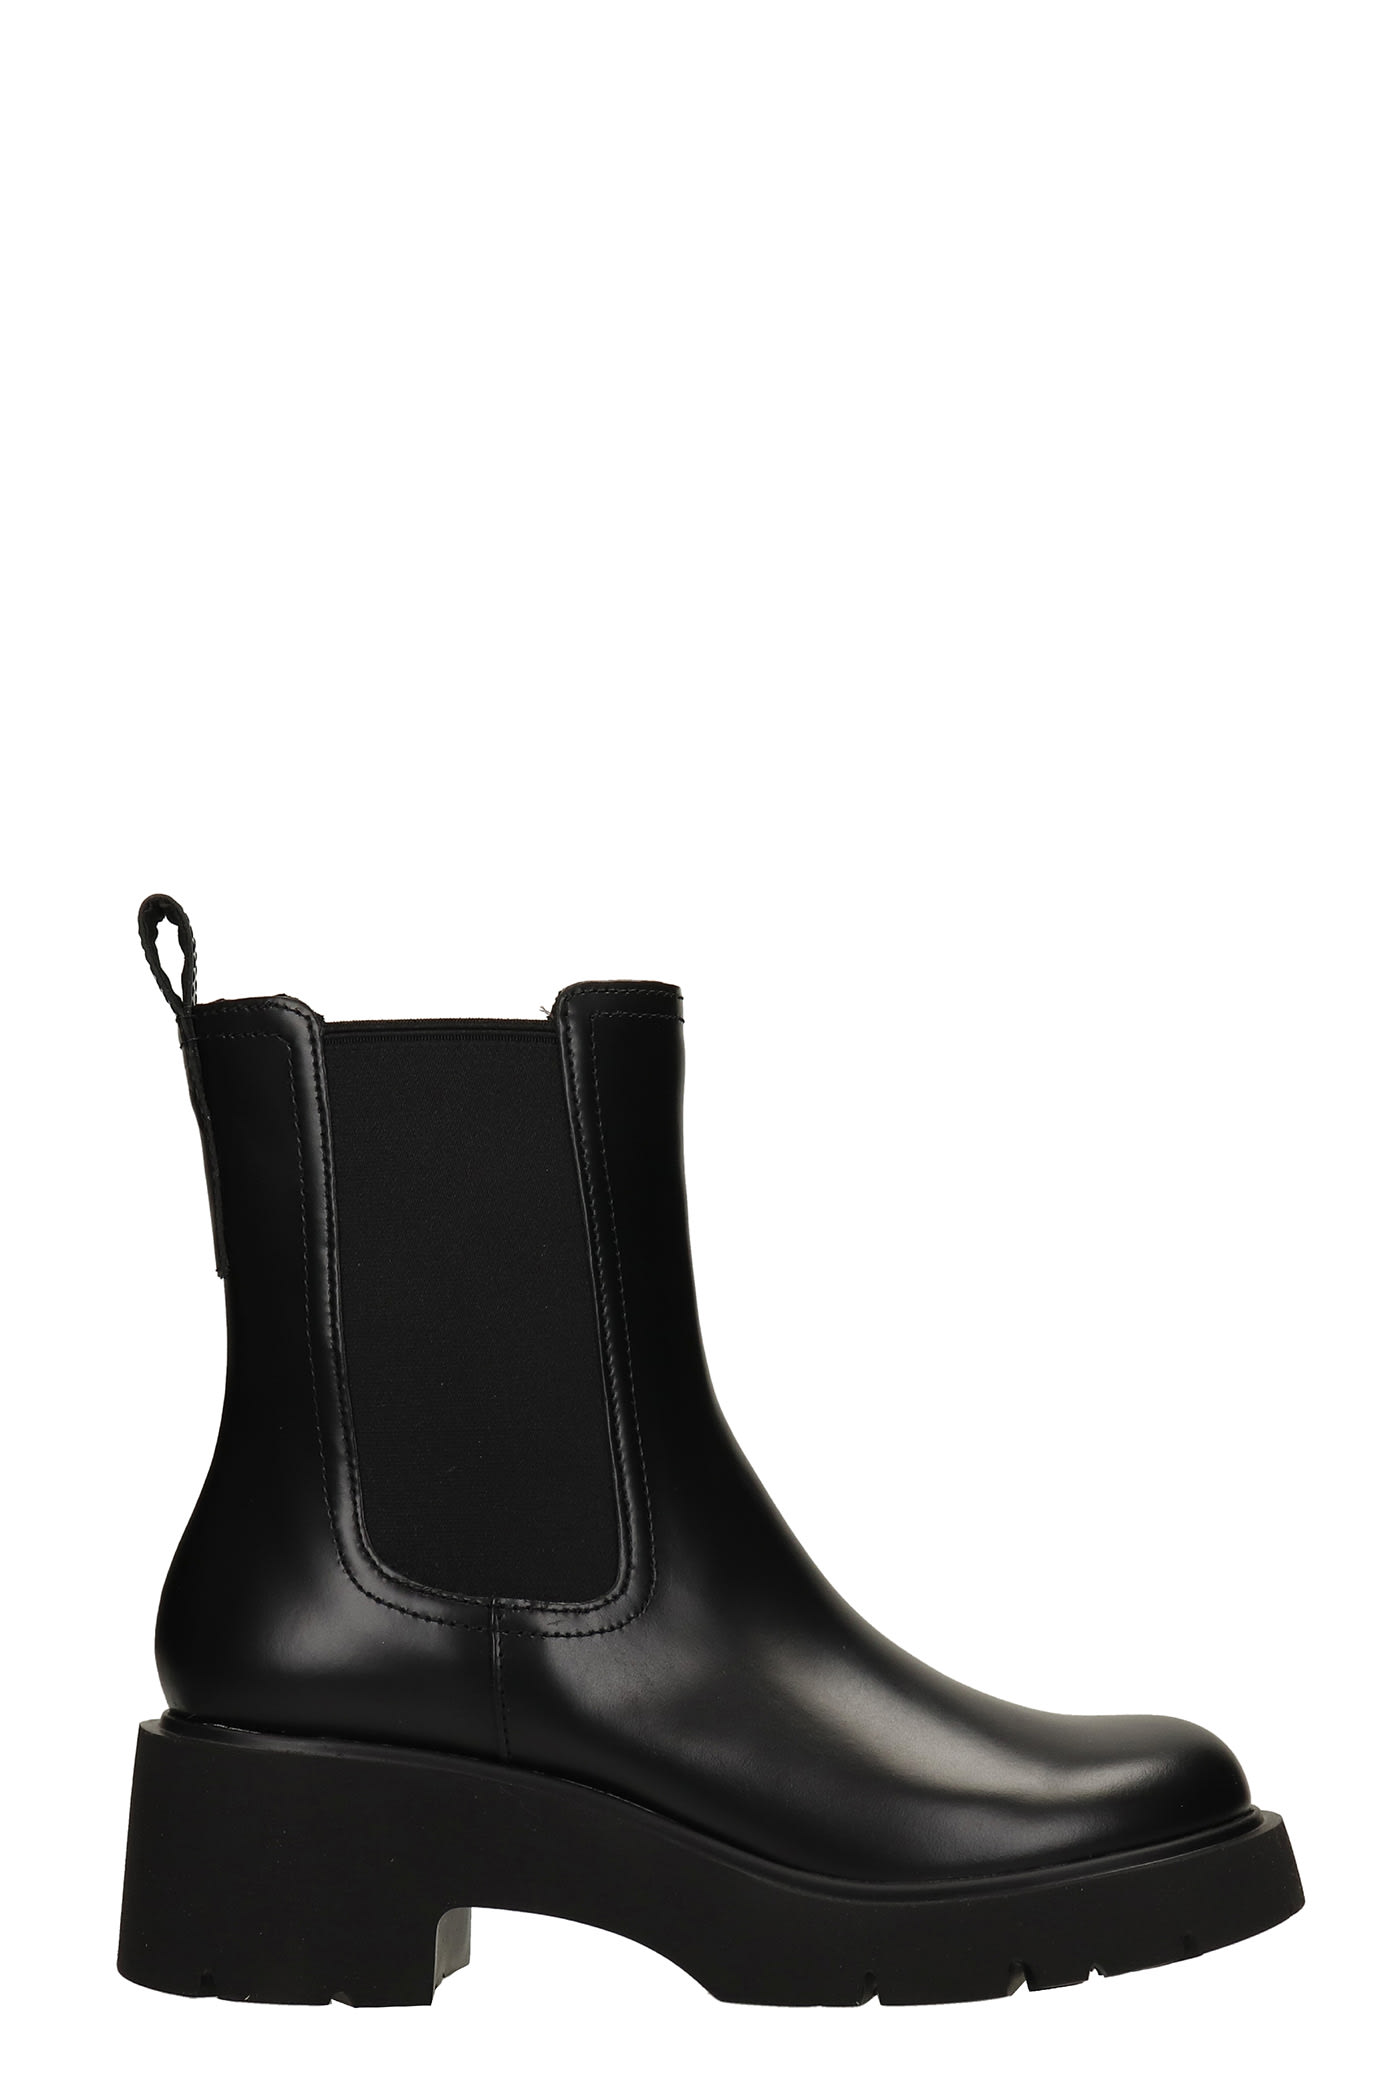 Camper Milah Combat Boots In Black Leather